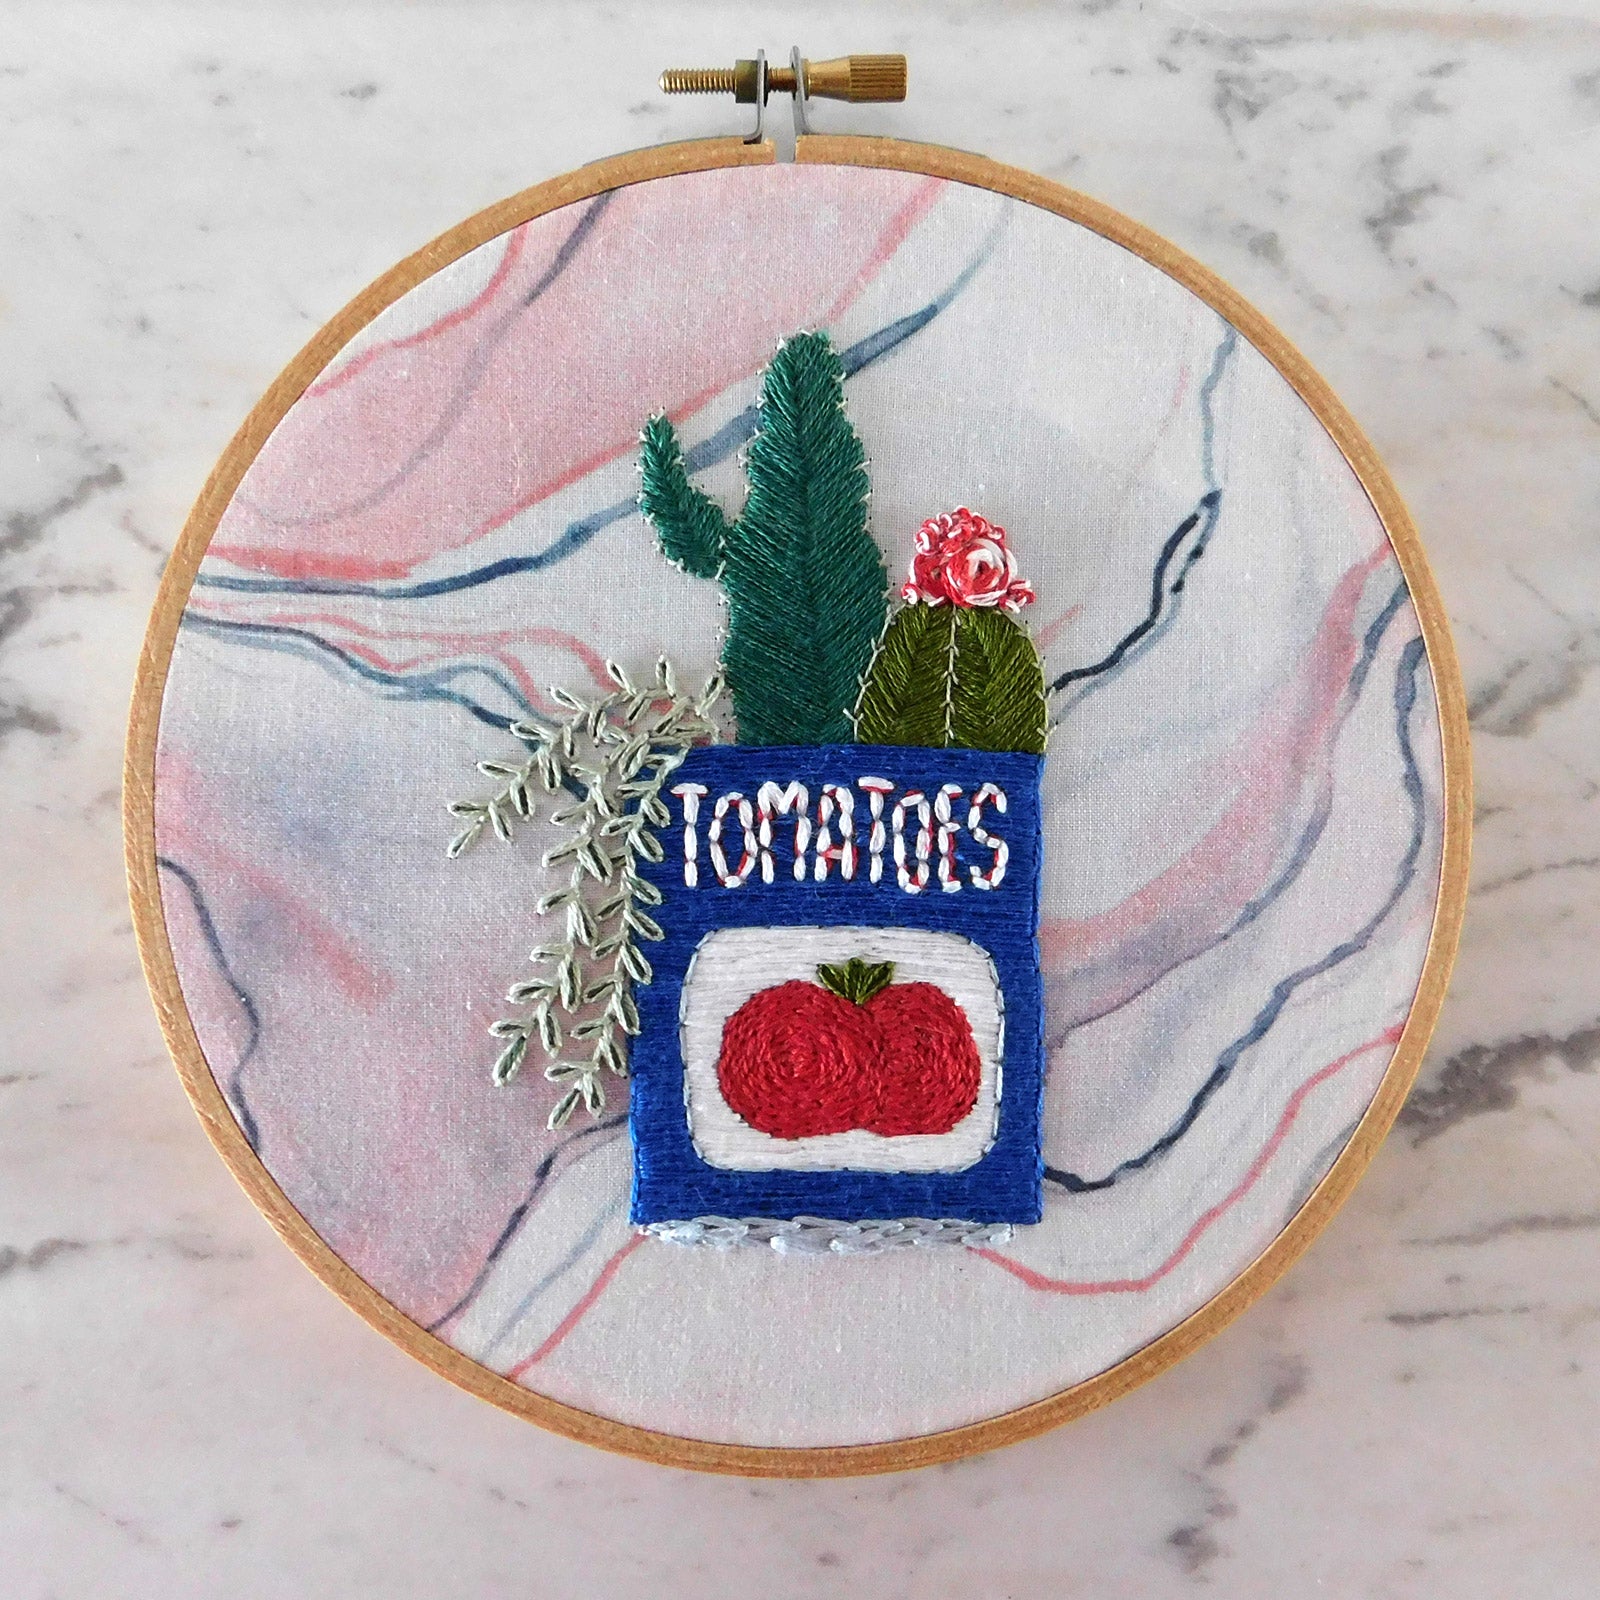 GIVEAWAY Alert! Enter to win a Embroidery Kit -- through 3/29